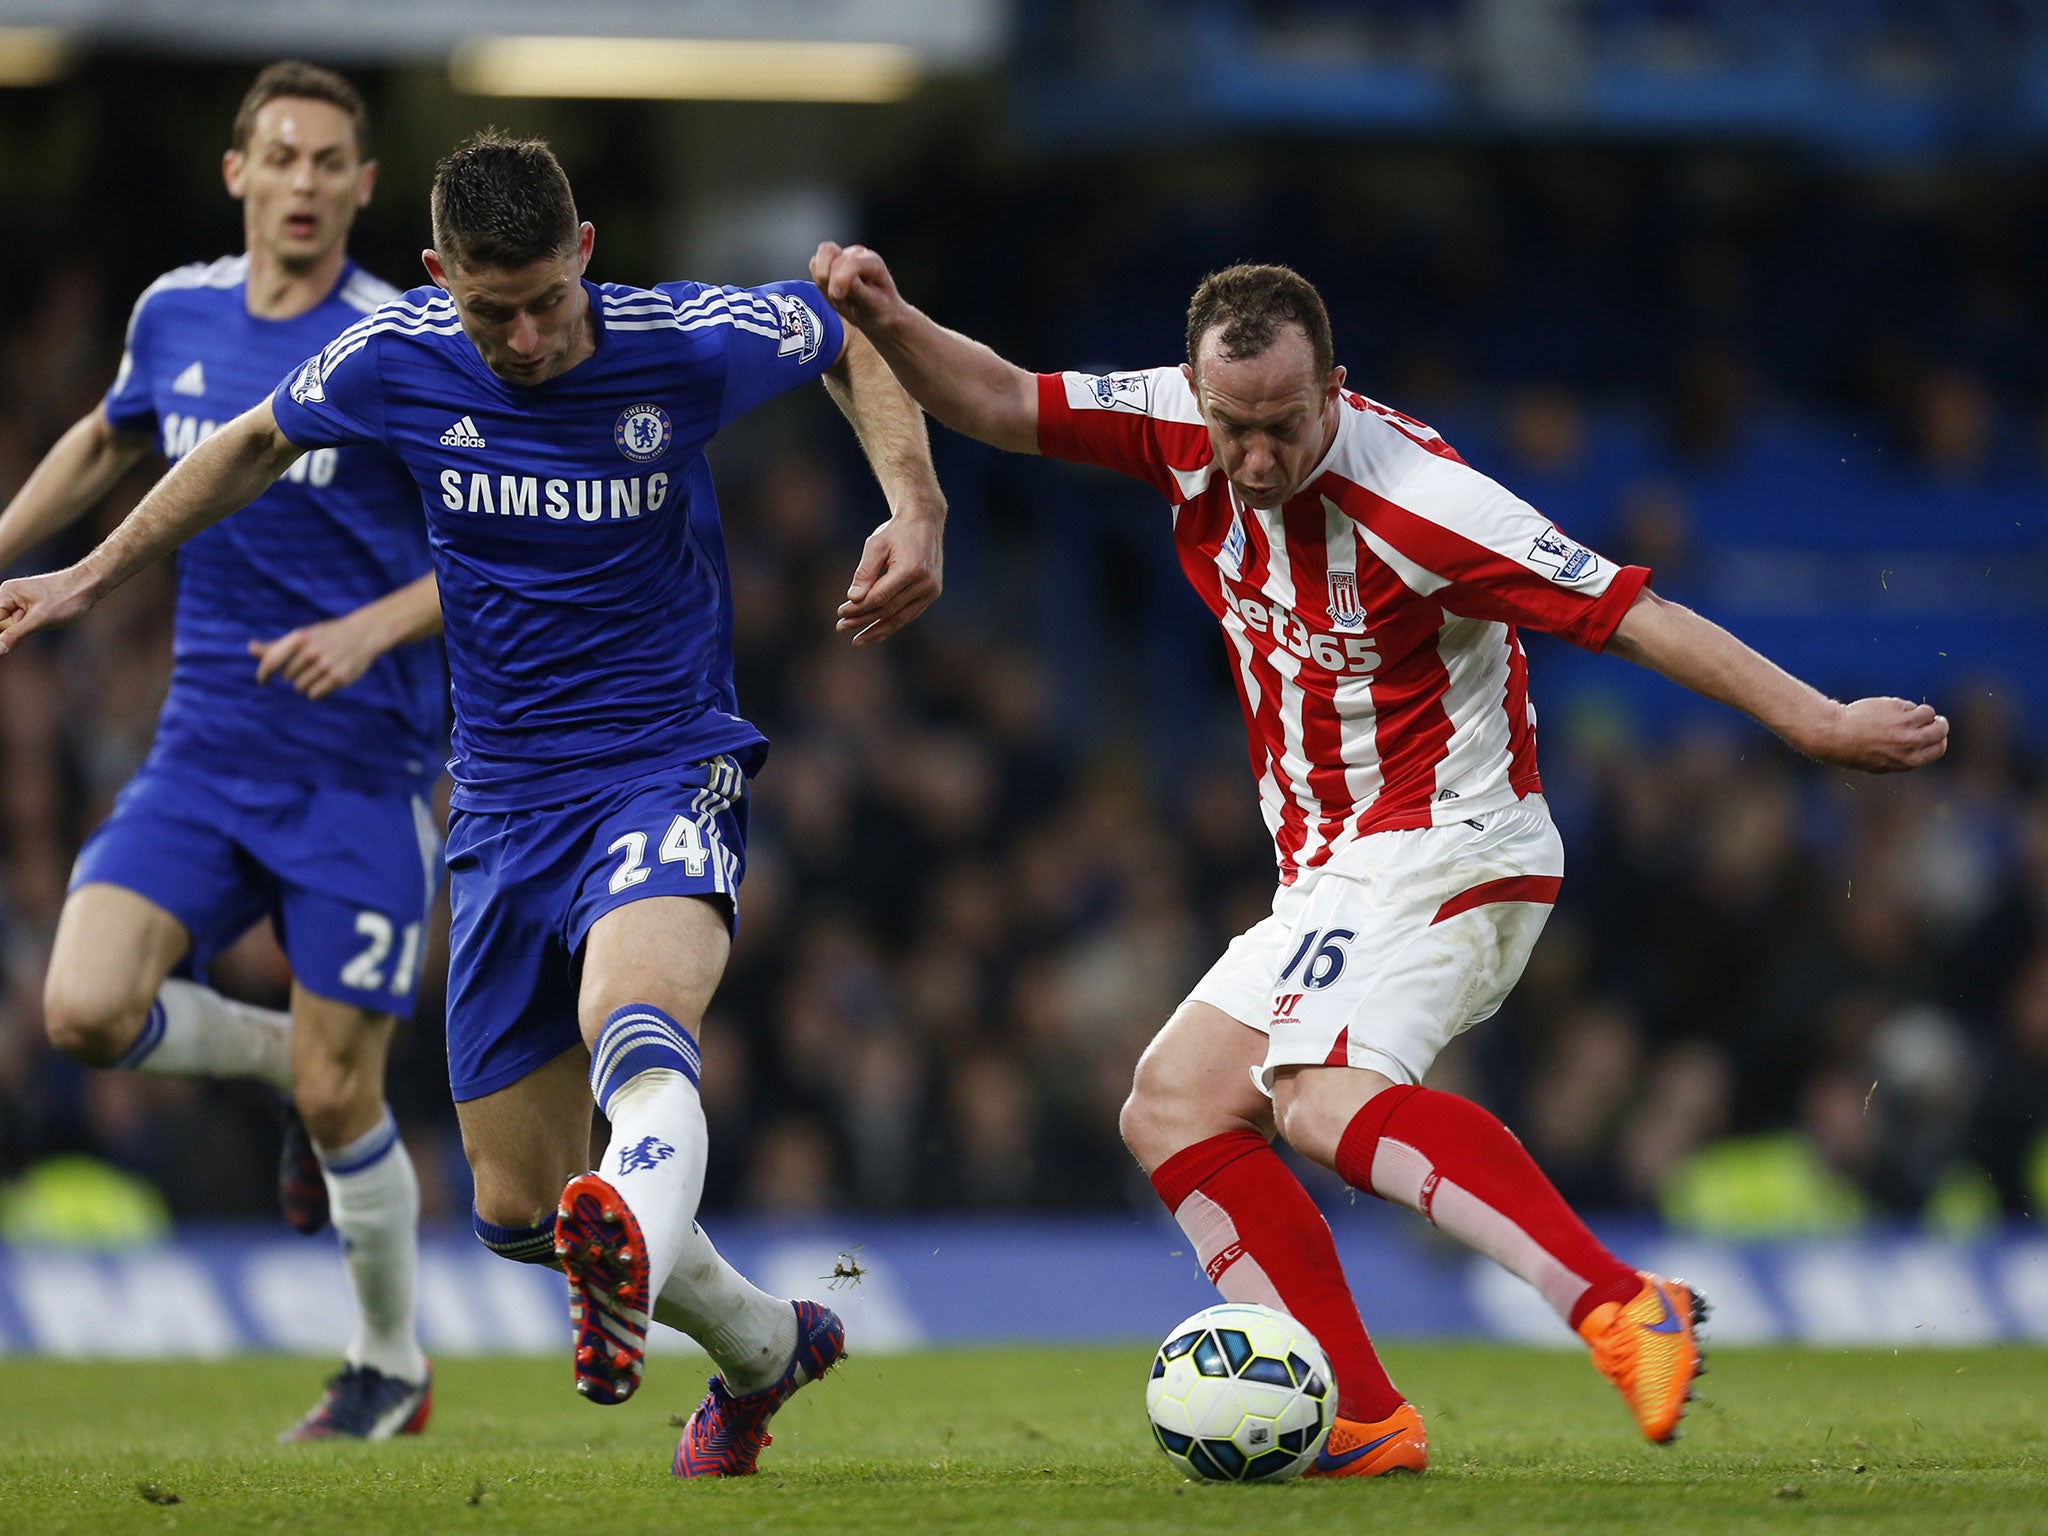 Charlie Adam unleashes an audacious shot from inside his own half to equalise for Stoke on Saturday at Chelsea